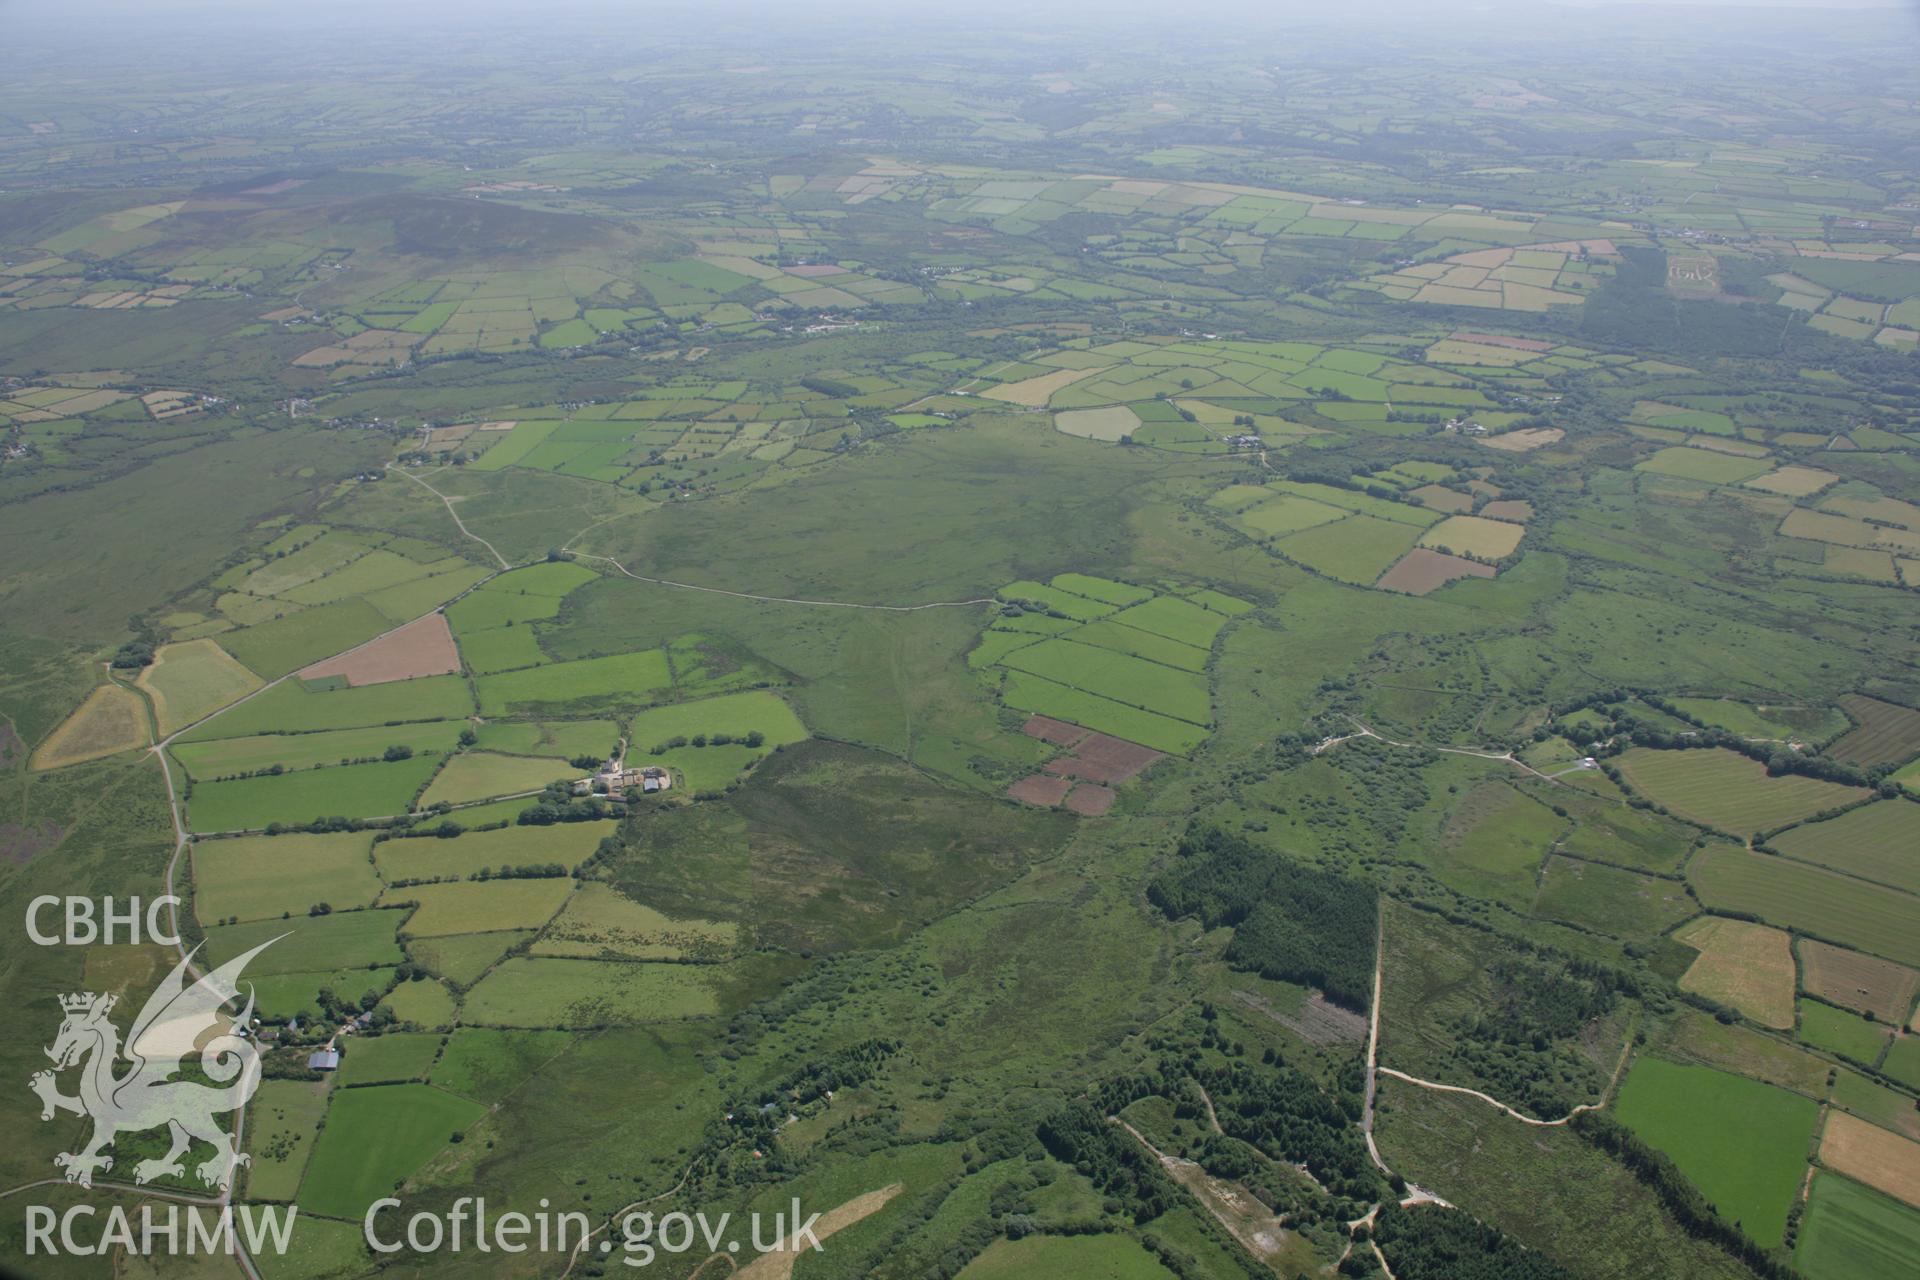 RCAHMW colour oblique aerial photograph showing landscape to the south of the Preseli Mountains. Taken on 14 July 2006 by Toby Driver